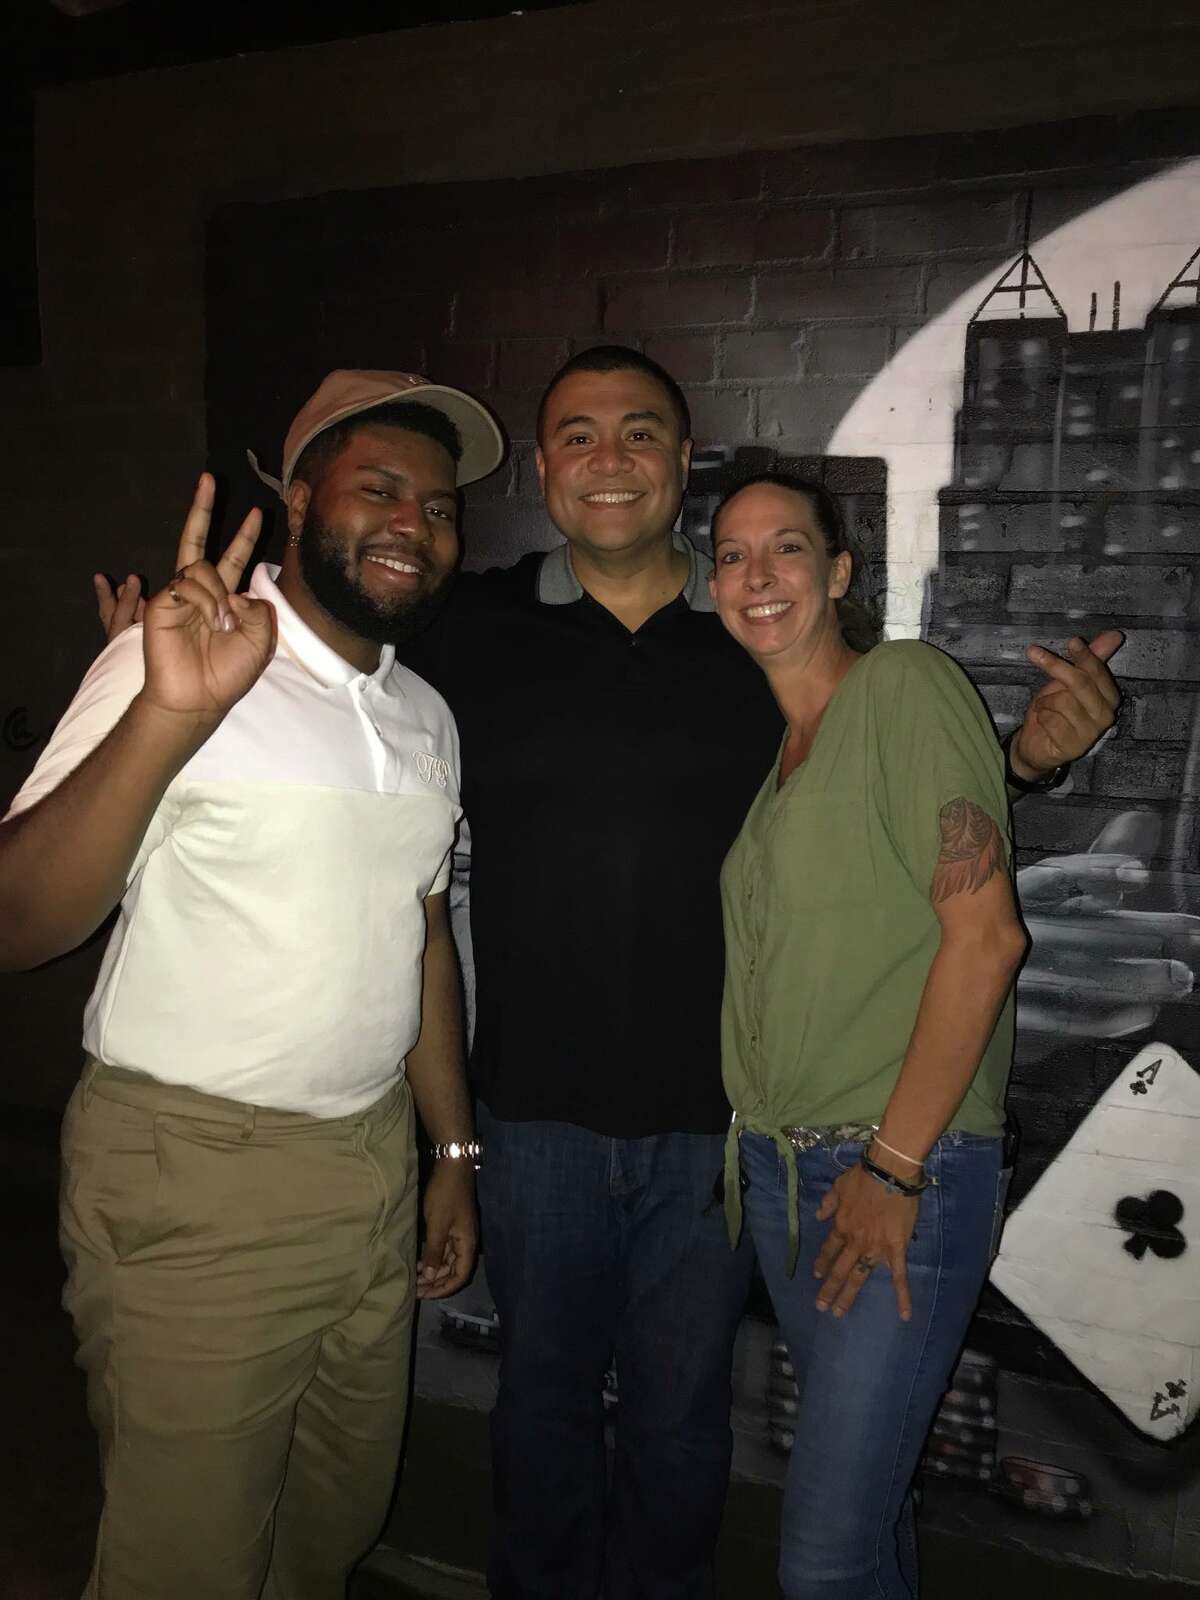 Smoke Owner Adrian Martinez said the Khalid showed up with a group of friends around 7 p.m. Monday, ordered the Pit Master Feast and signed himself up for karaoke under the name "Roger."